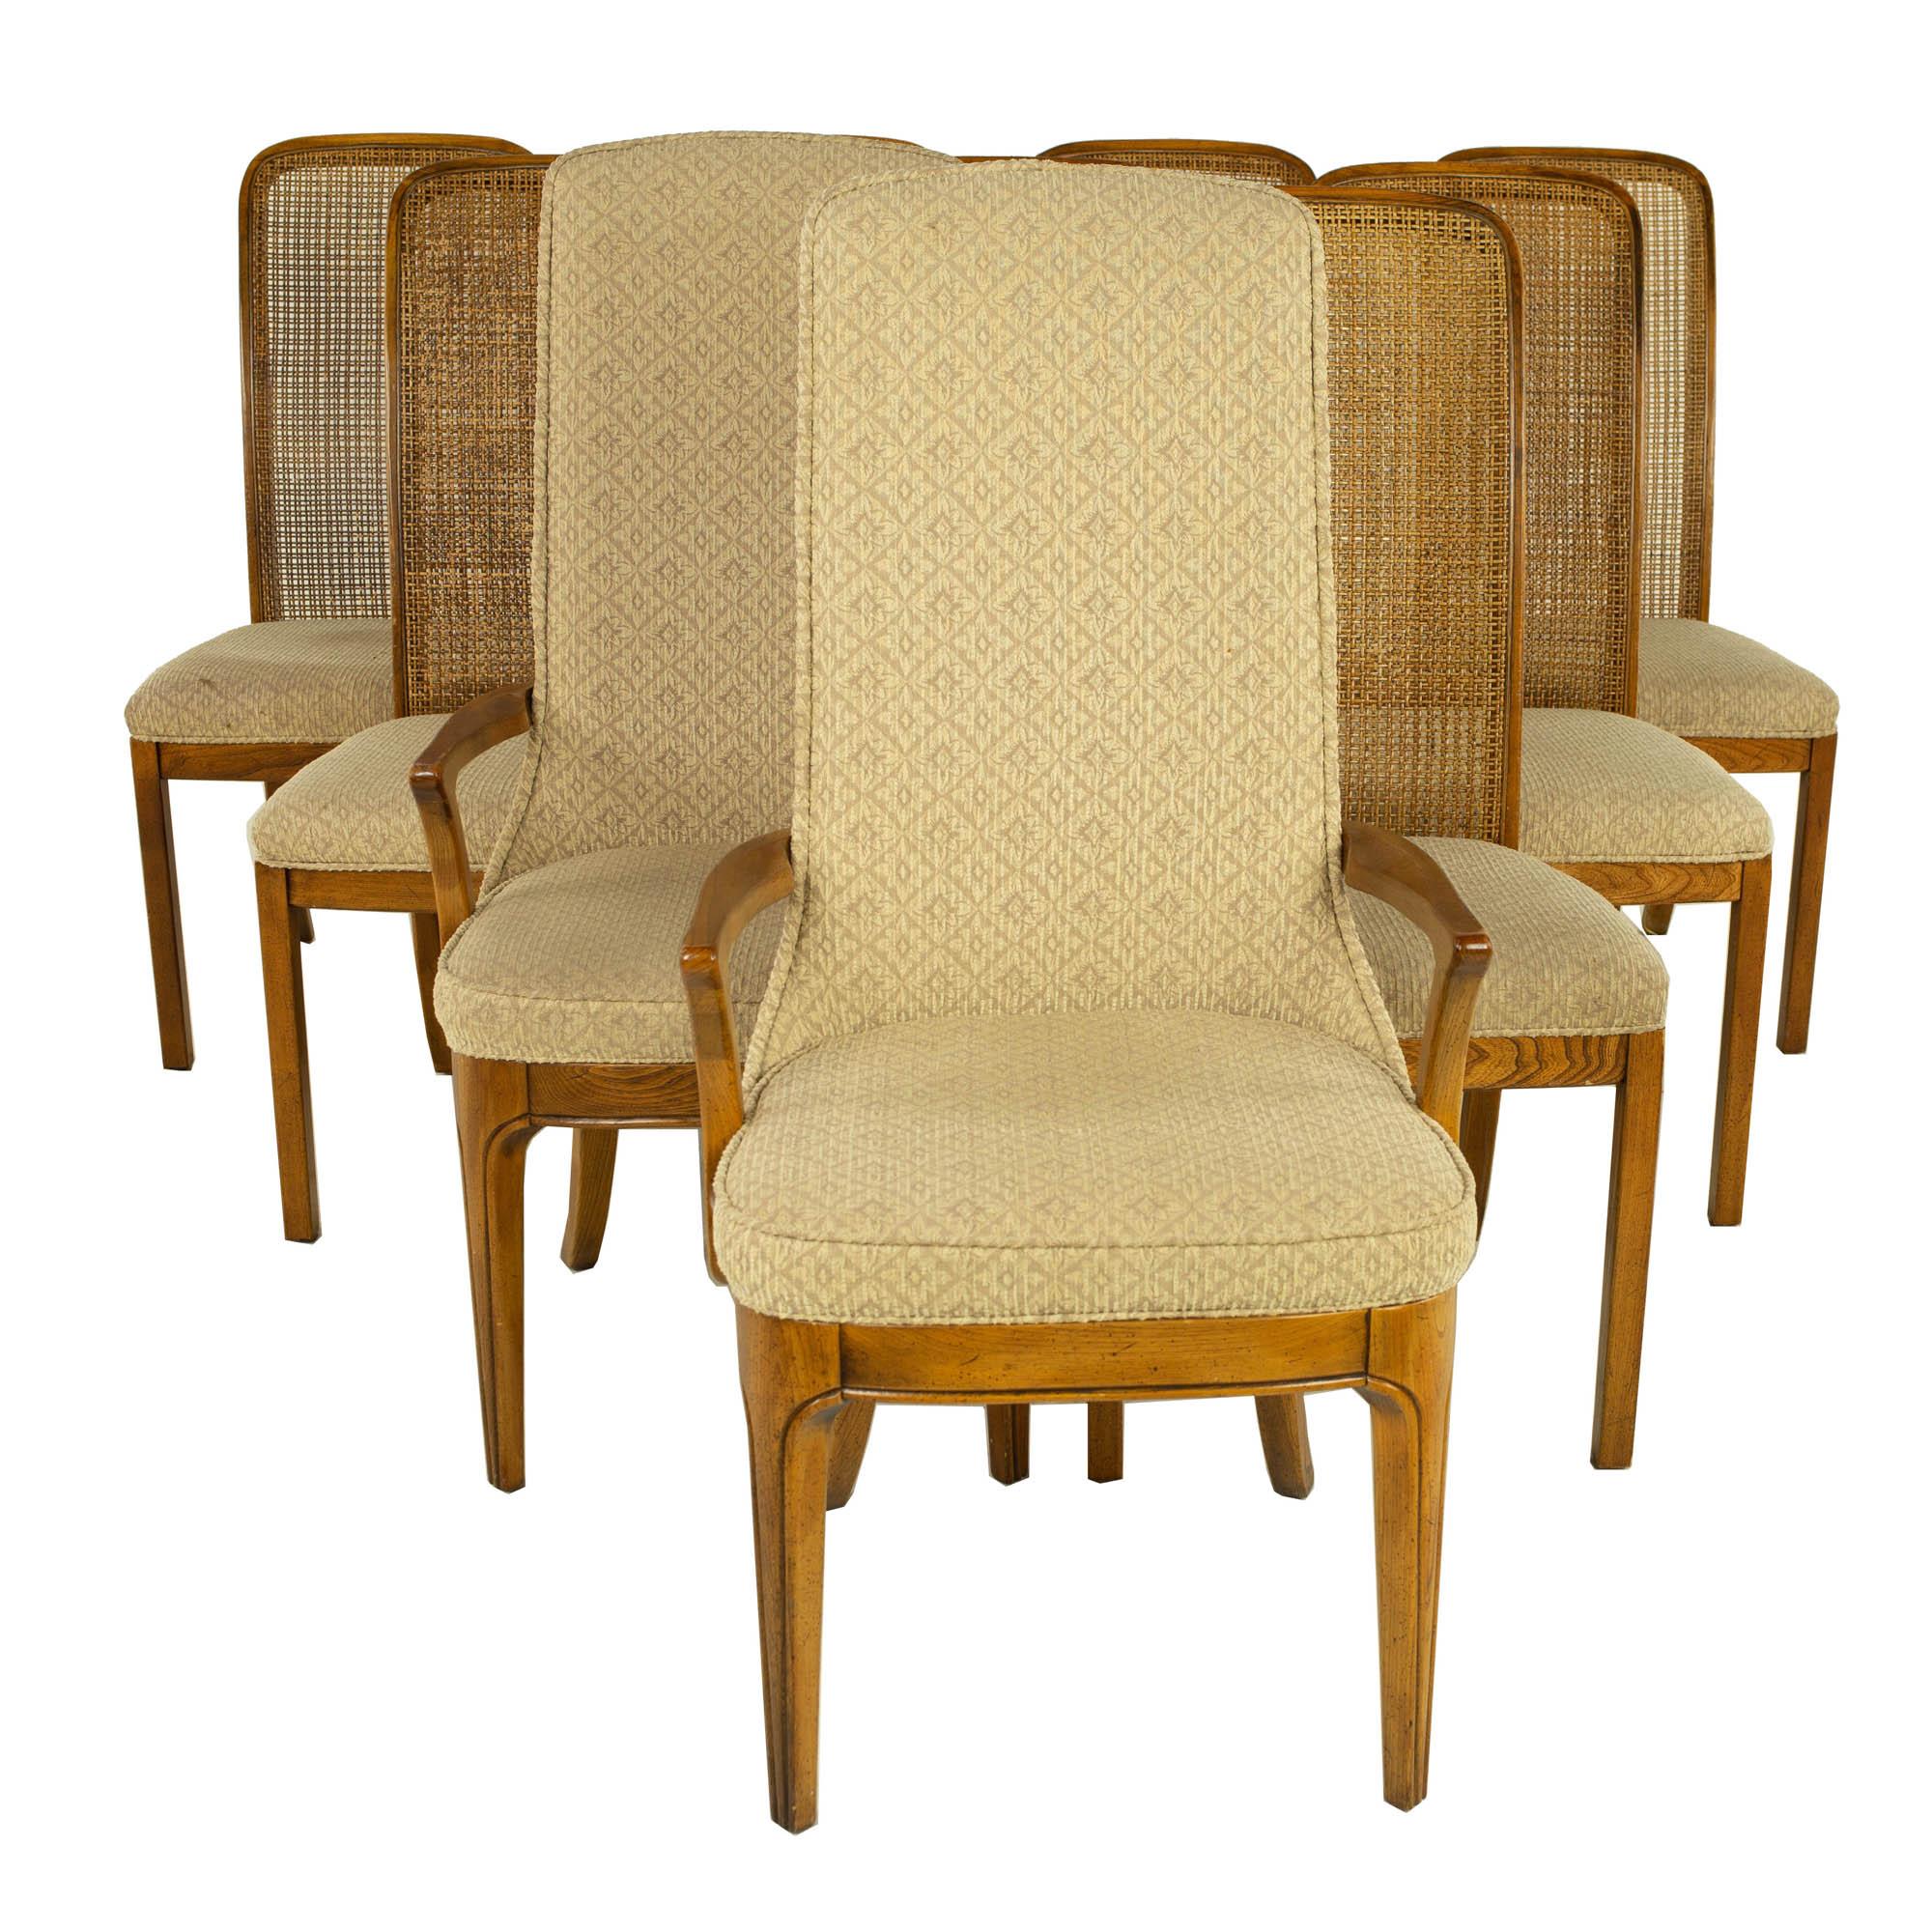 Hickory Manufacturing Company mid century burlwood and cane dining chairs - set of 10

These chairs measure: 21.5 wide x 19 deep x 43 inches high, with a seat height of 18 and arm height of 24 inches

?All pieces of furniture can be had in what